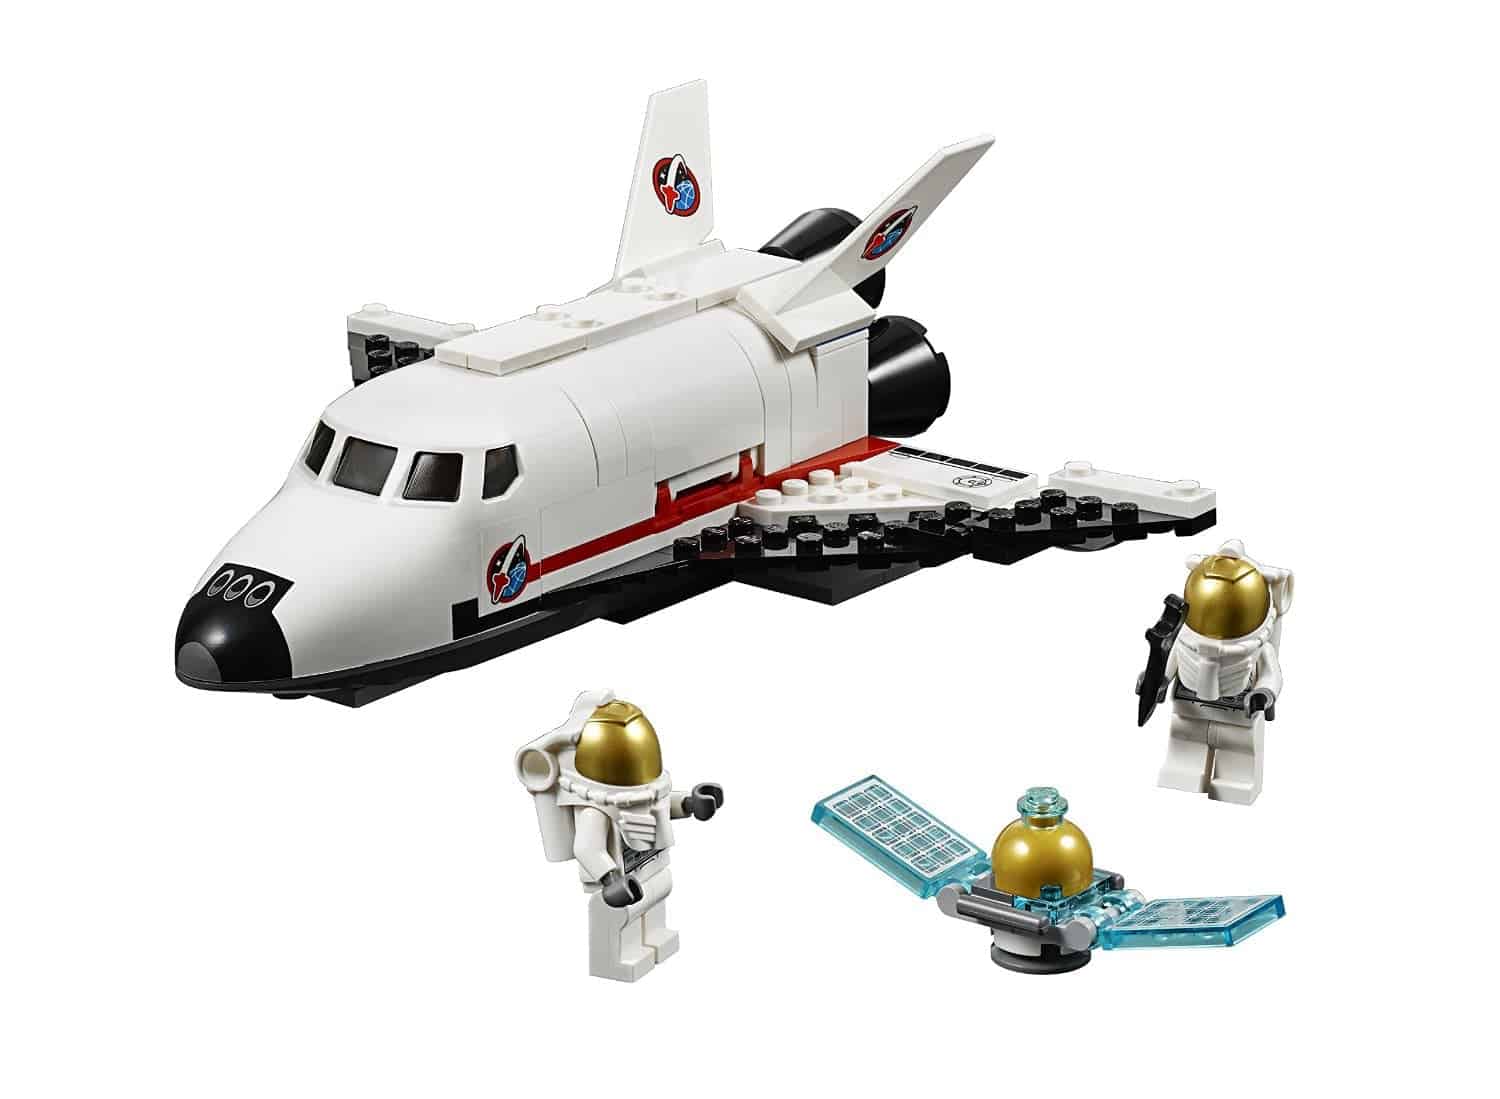 Lego Gift Ideas by Age - Toddler to Twelve Years: Space Port | www.thepinningmama.com